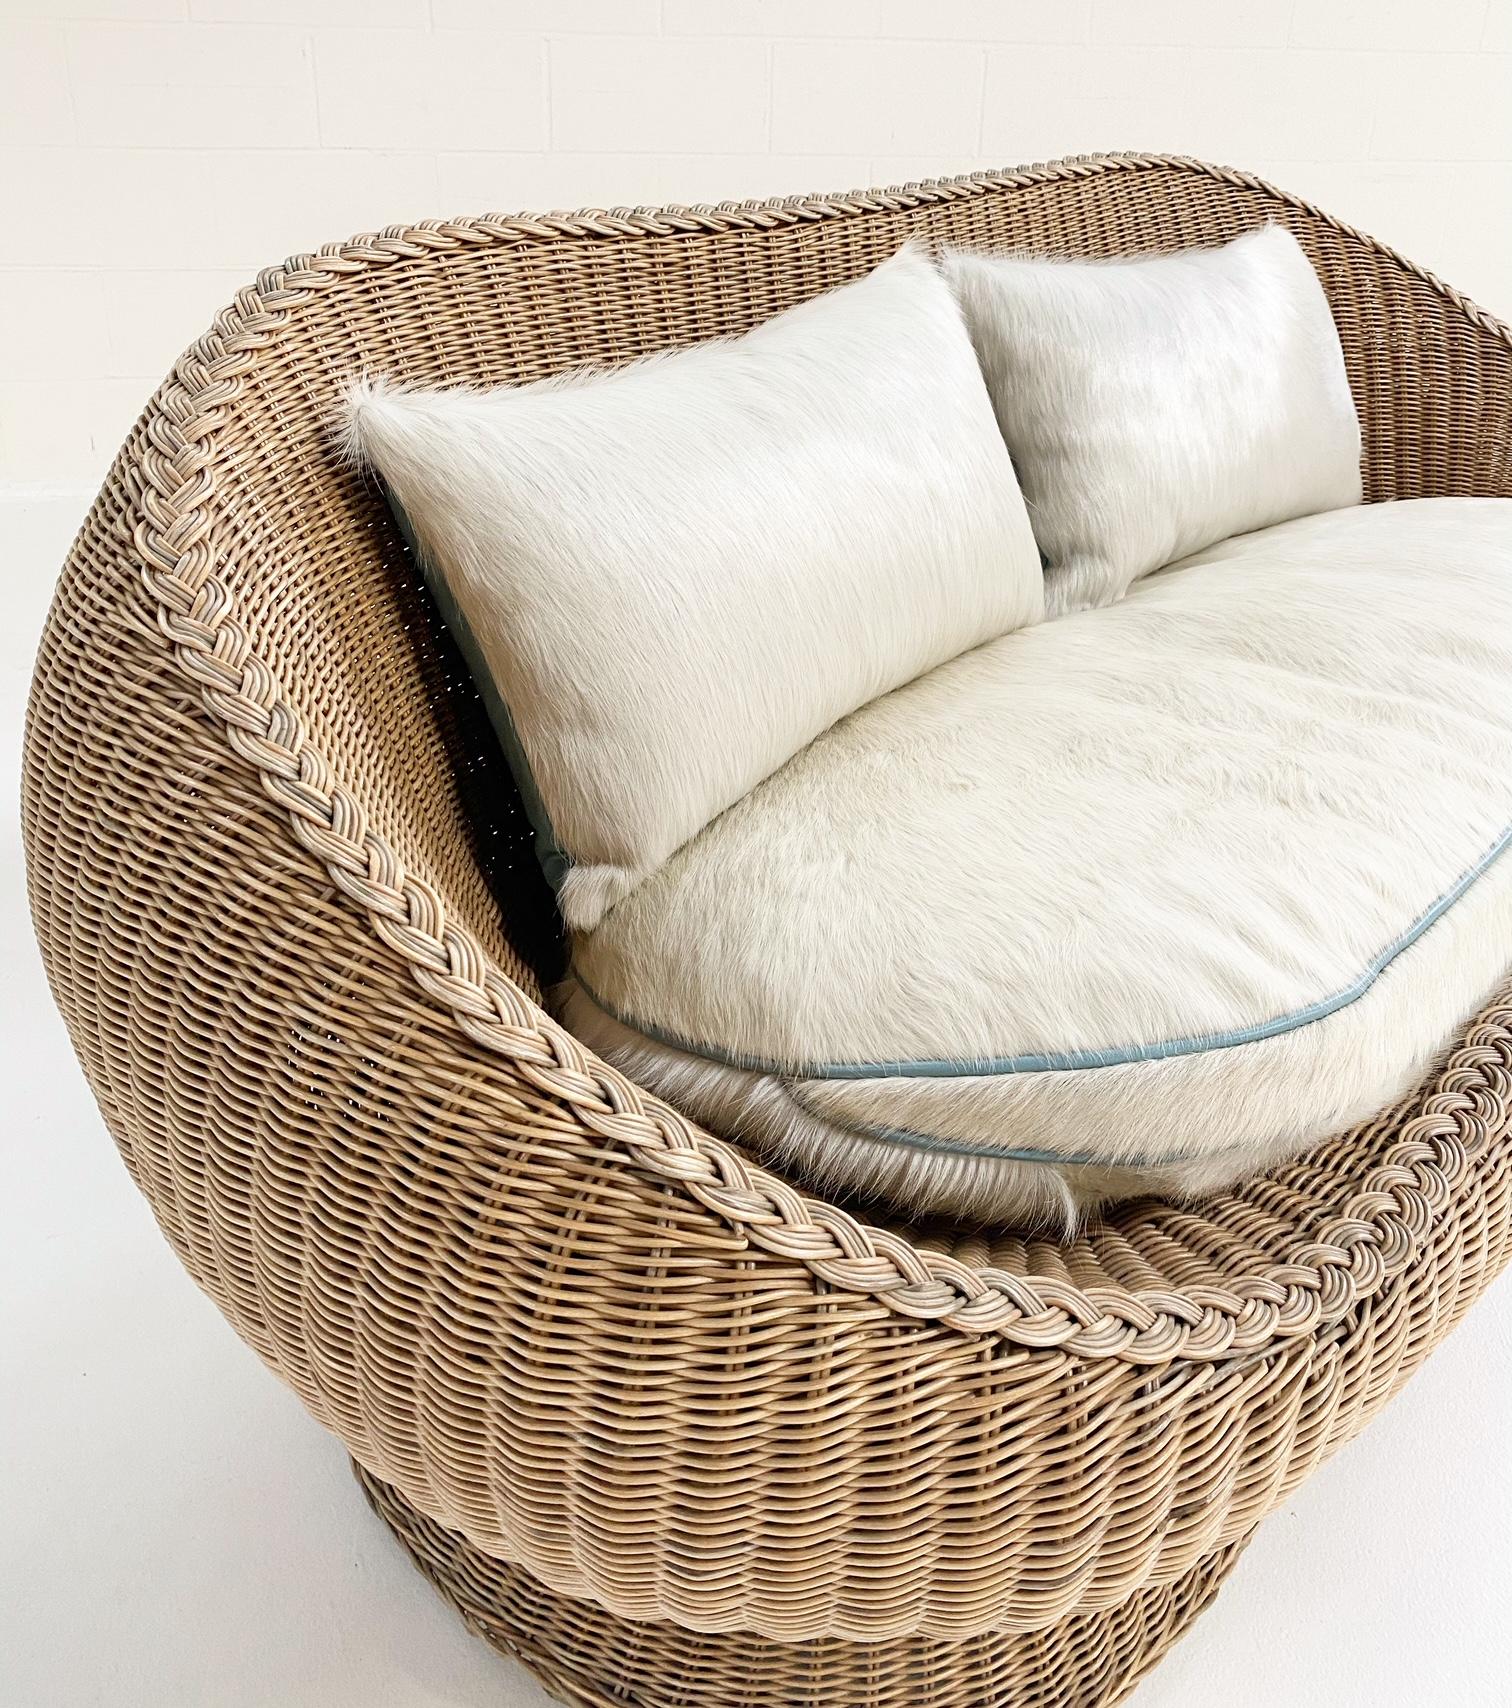 In the style of Eero Aarnio. 

The romance of rattan! Homey, versatile, and always stylish. This loveseat is part of a 10-piece set but we have decided to sell the pieces separately. 

For the loveseat, we created a custom Brazilian ivory